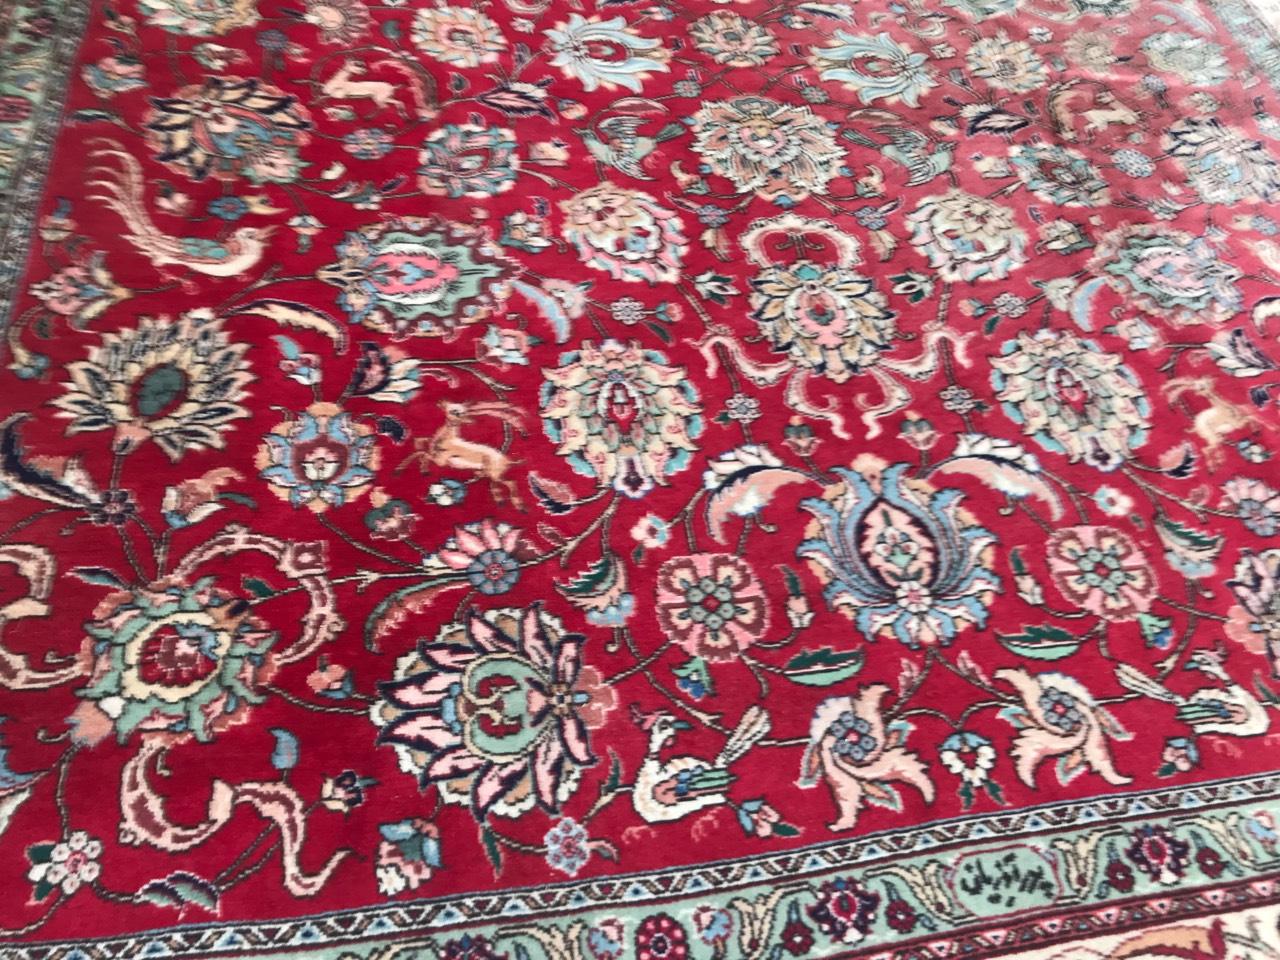 Very beautiful large rug with a nice decorative design and red field color with green, orange and blue. Entirely hand knotted with wool velvet on cotton foundation.